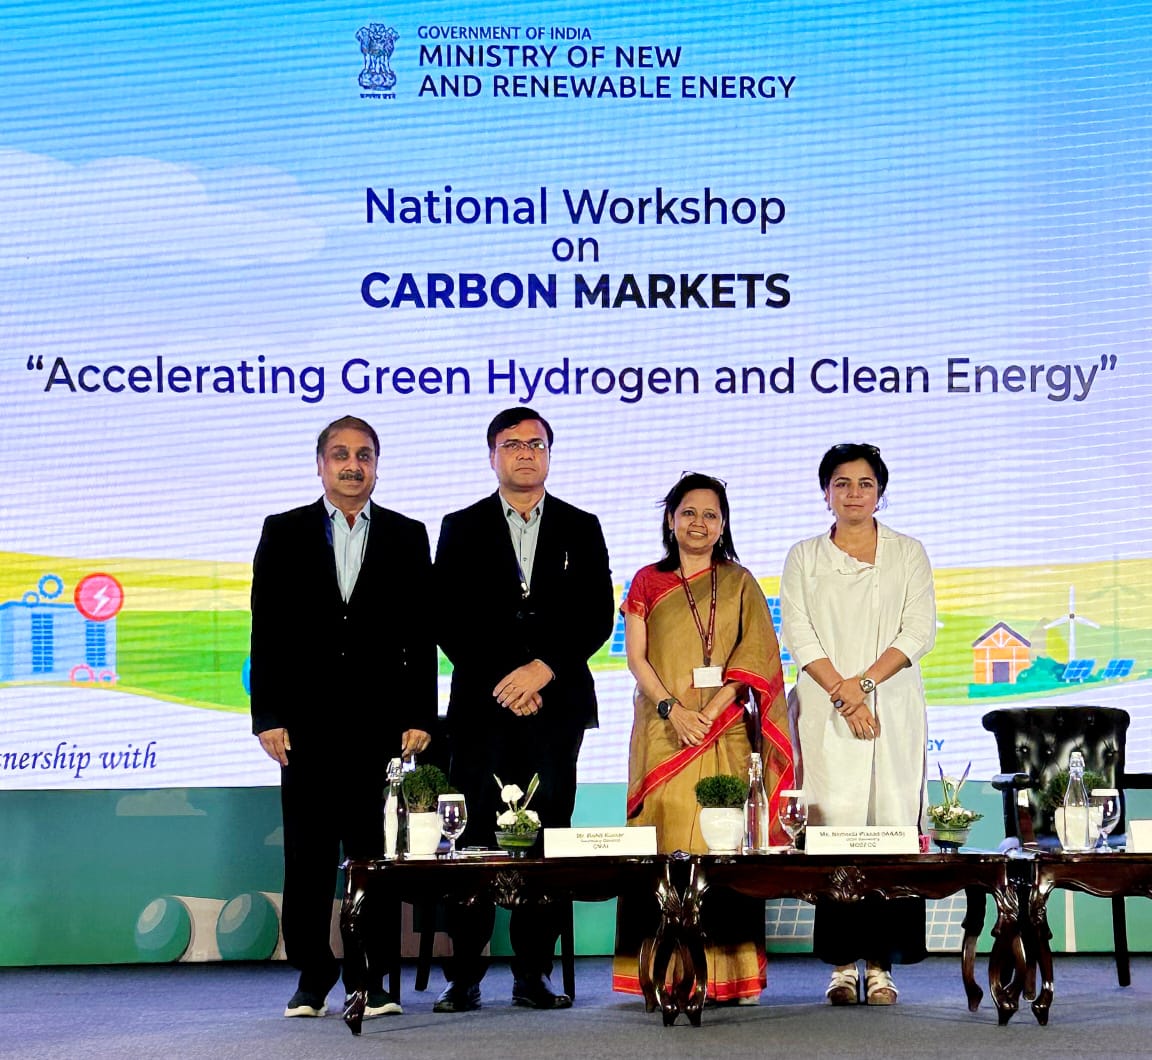 National Carbon Market Workshop organized by MNRE in partnership with CMAI – “Accelerating Green Hydrogen and Clean Energy” – EQ